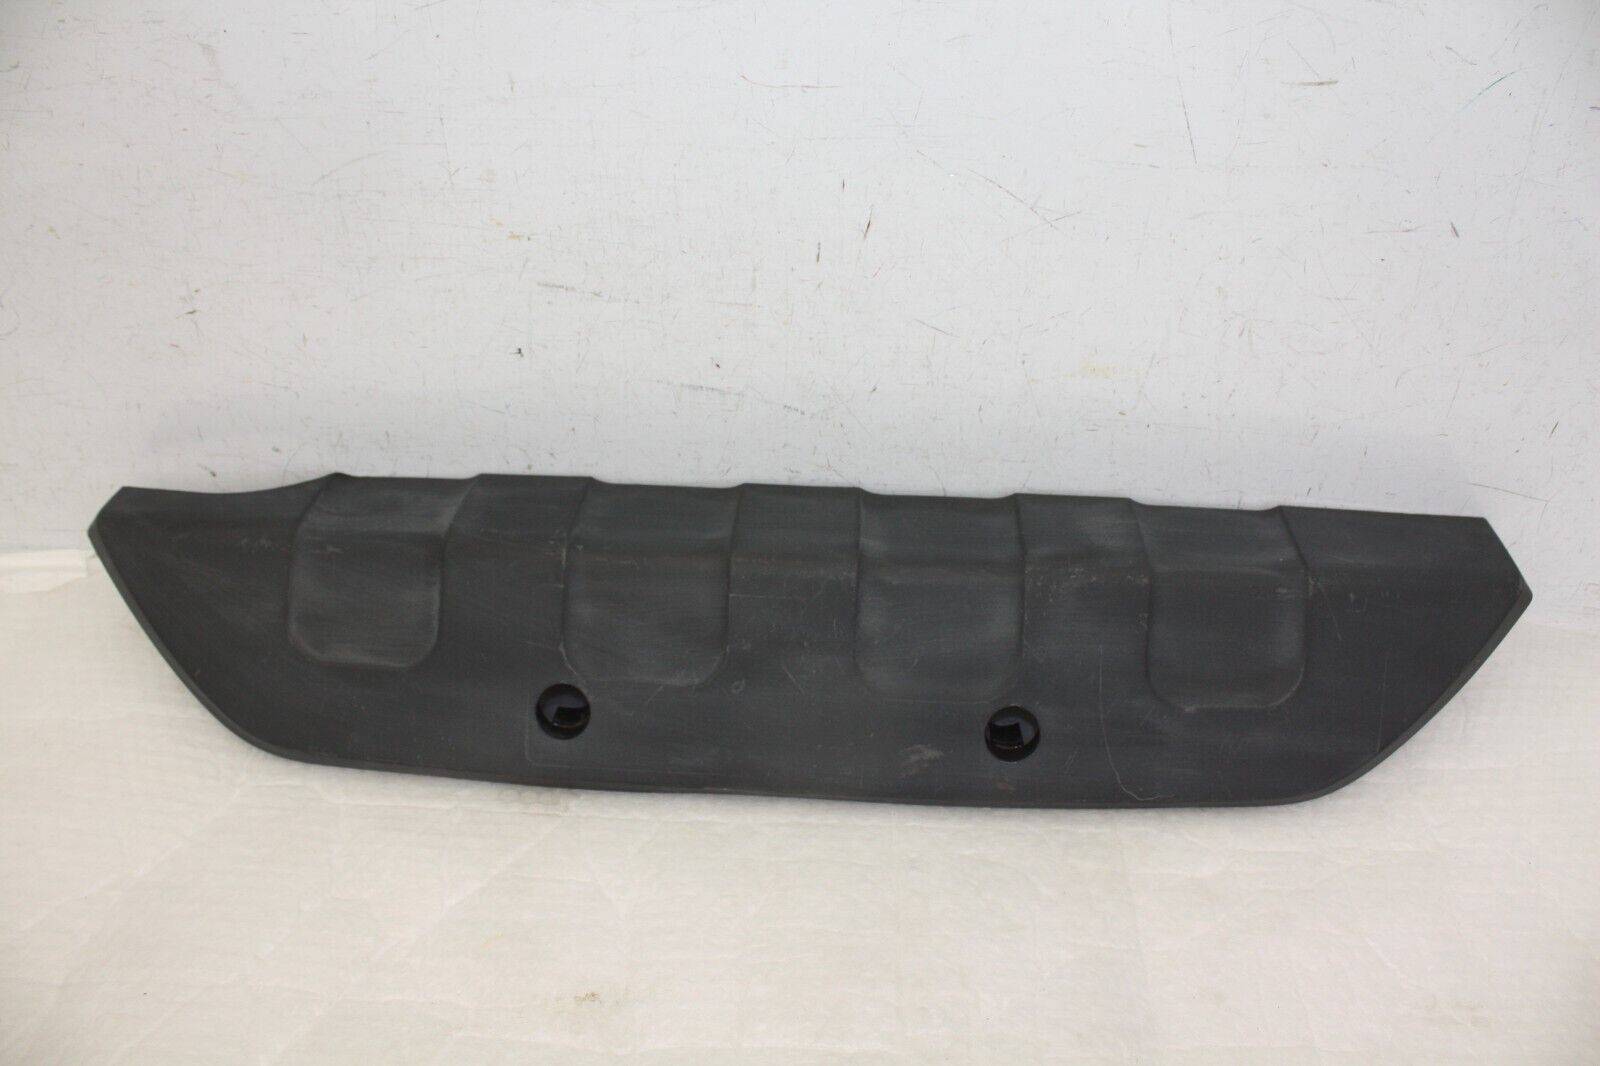 Ford Ecosport Rear Bumper Lower Section FN1B 17D781 AAW Genuine 176344098475